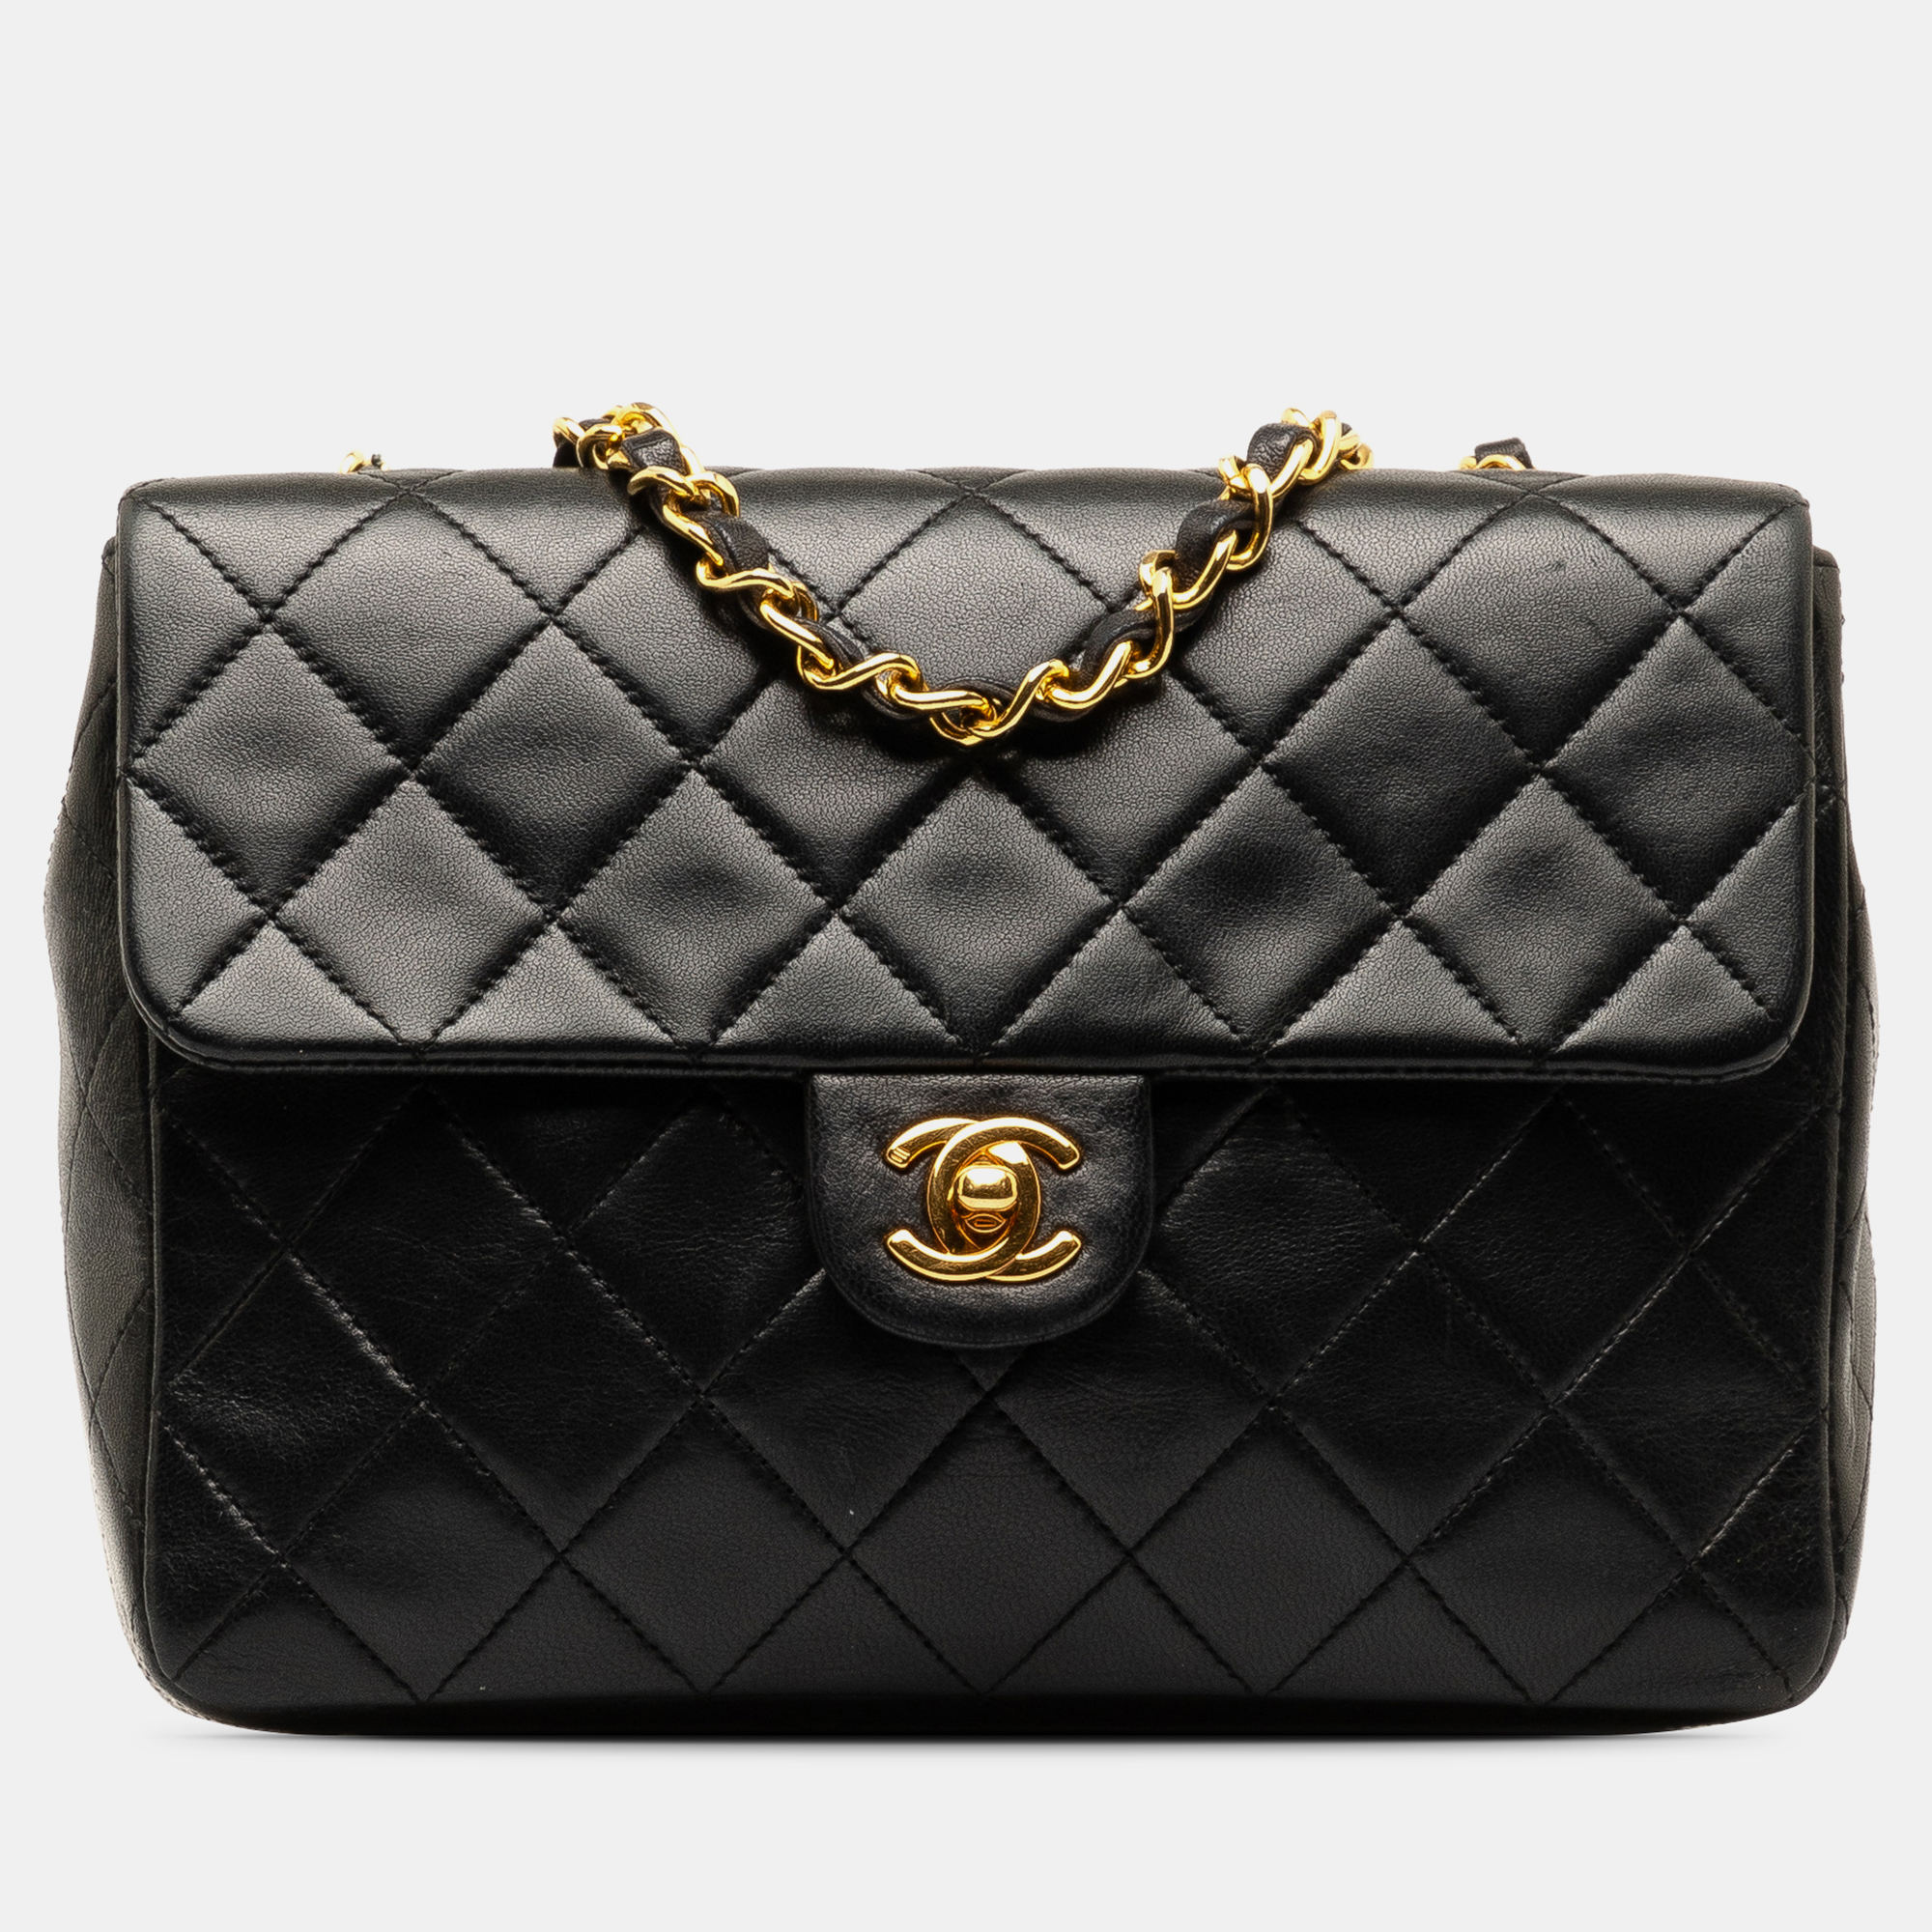 Chanel square classic quilted lambskin flap bag